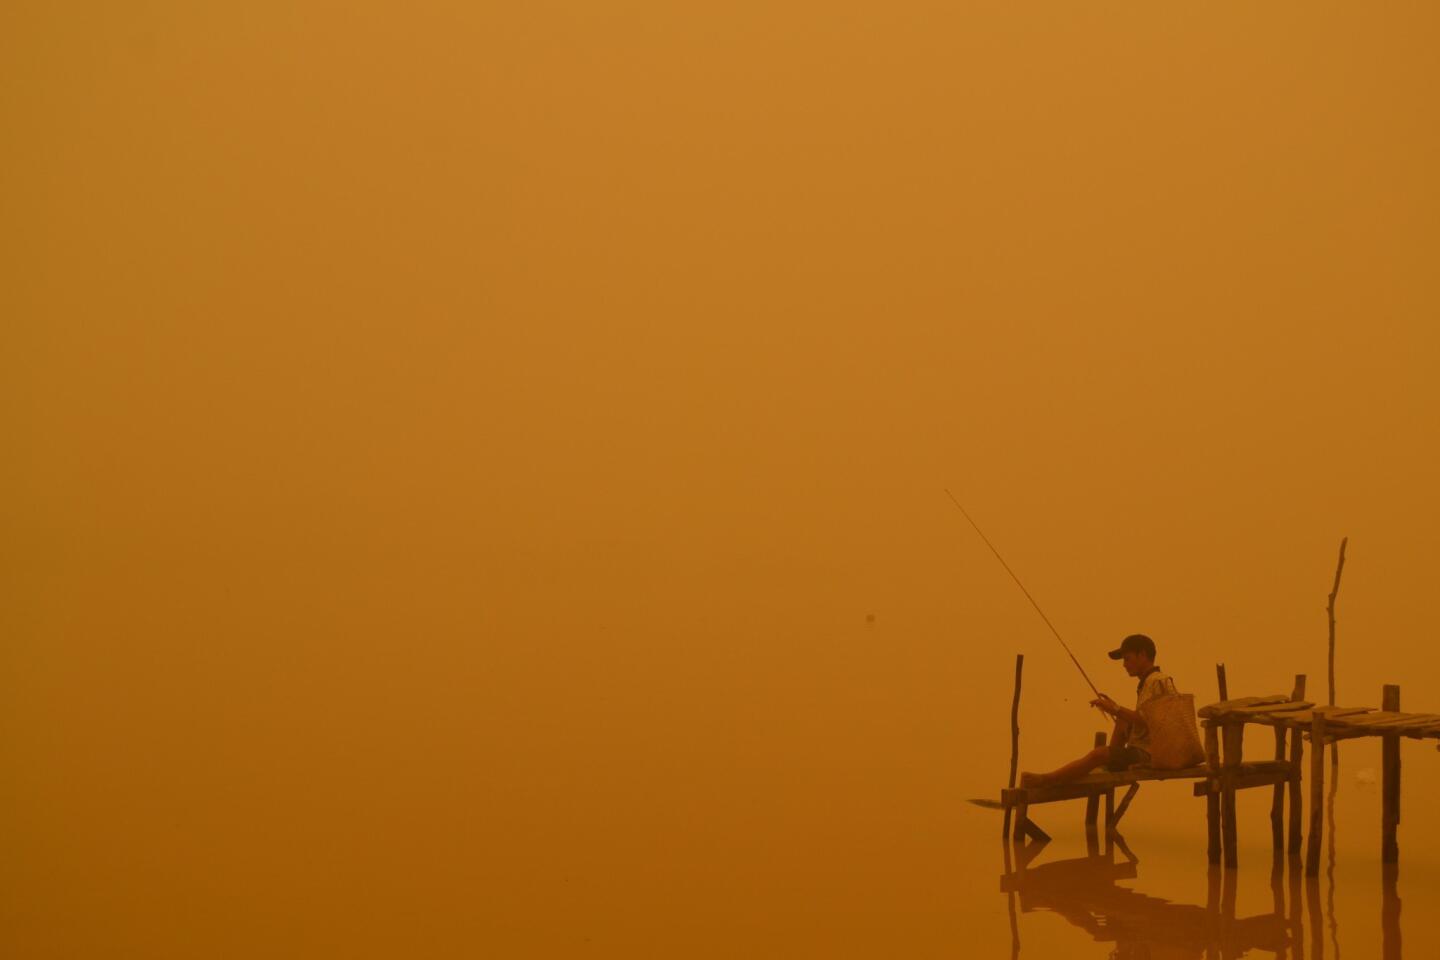 A resident fishes by the river in Palangkaraya city, one of worst-hit by haze in central Kalimantan province. Indonesian forest and agricultural fires are cloaking Southeast Asia in acrid haze.